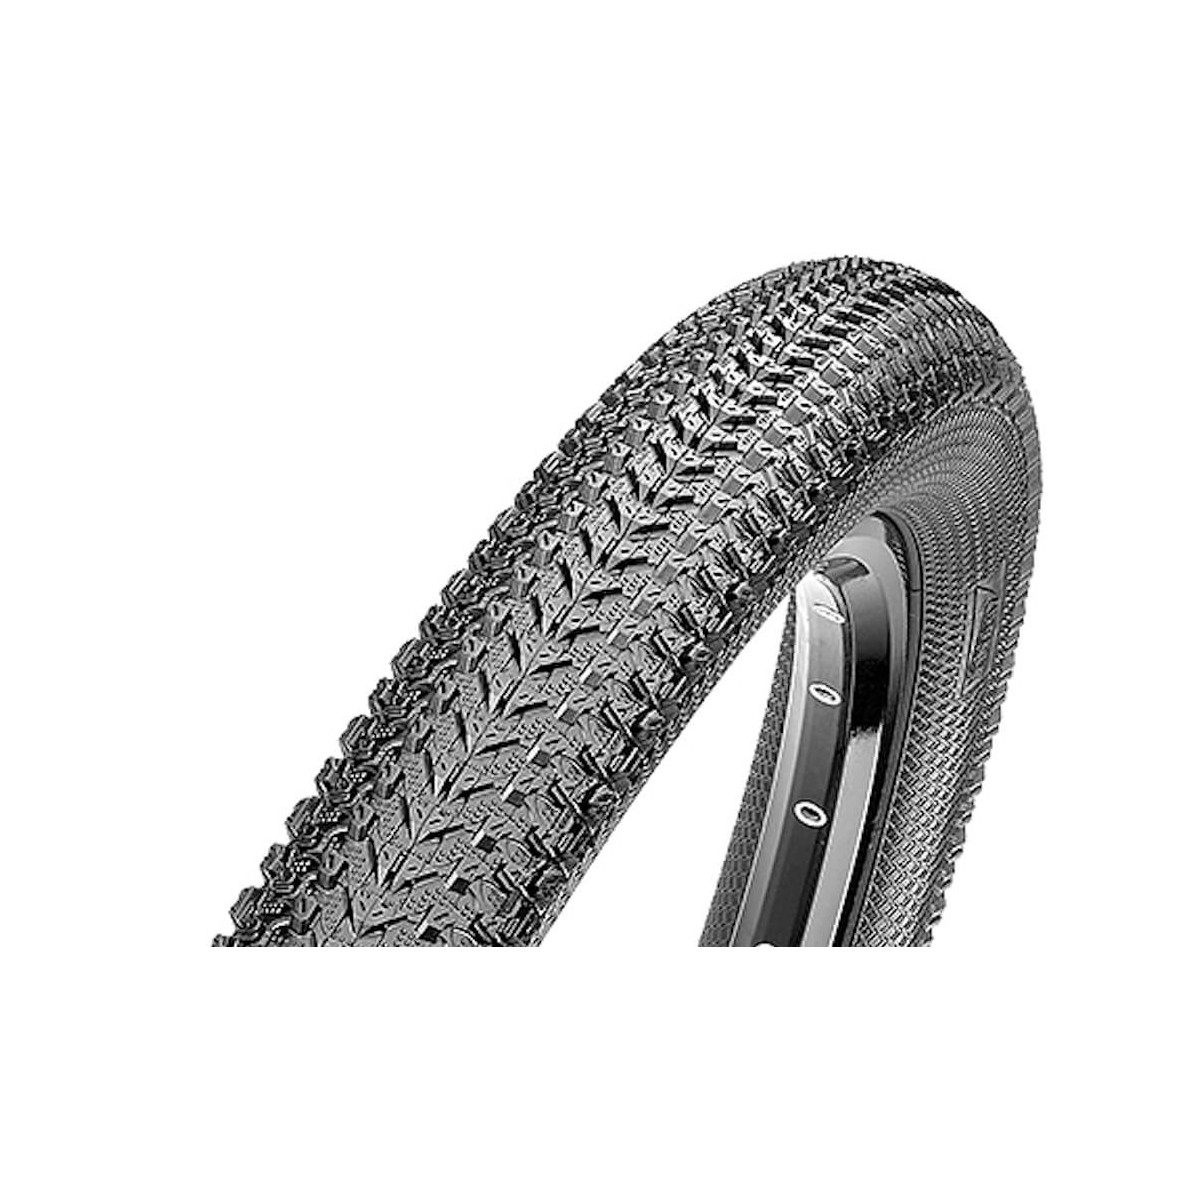 Maxxis Pace 29